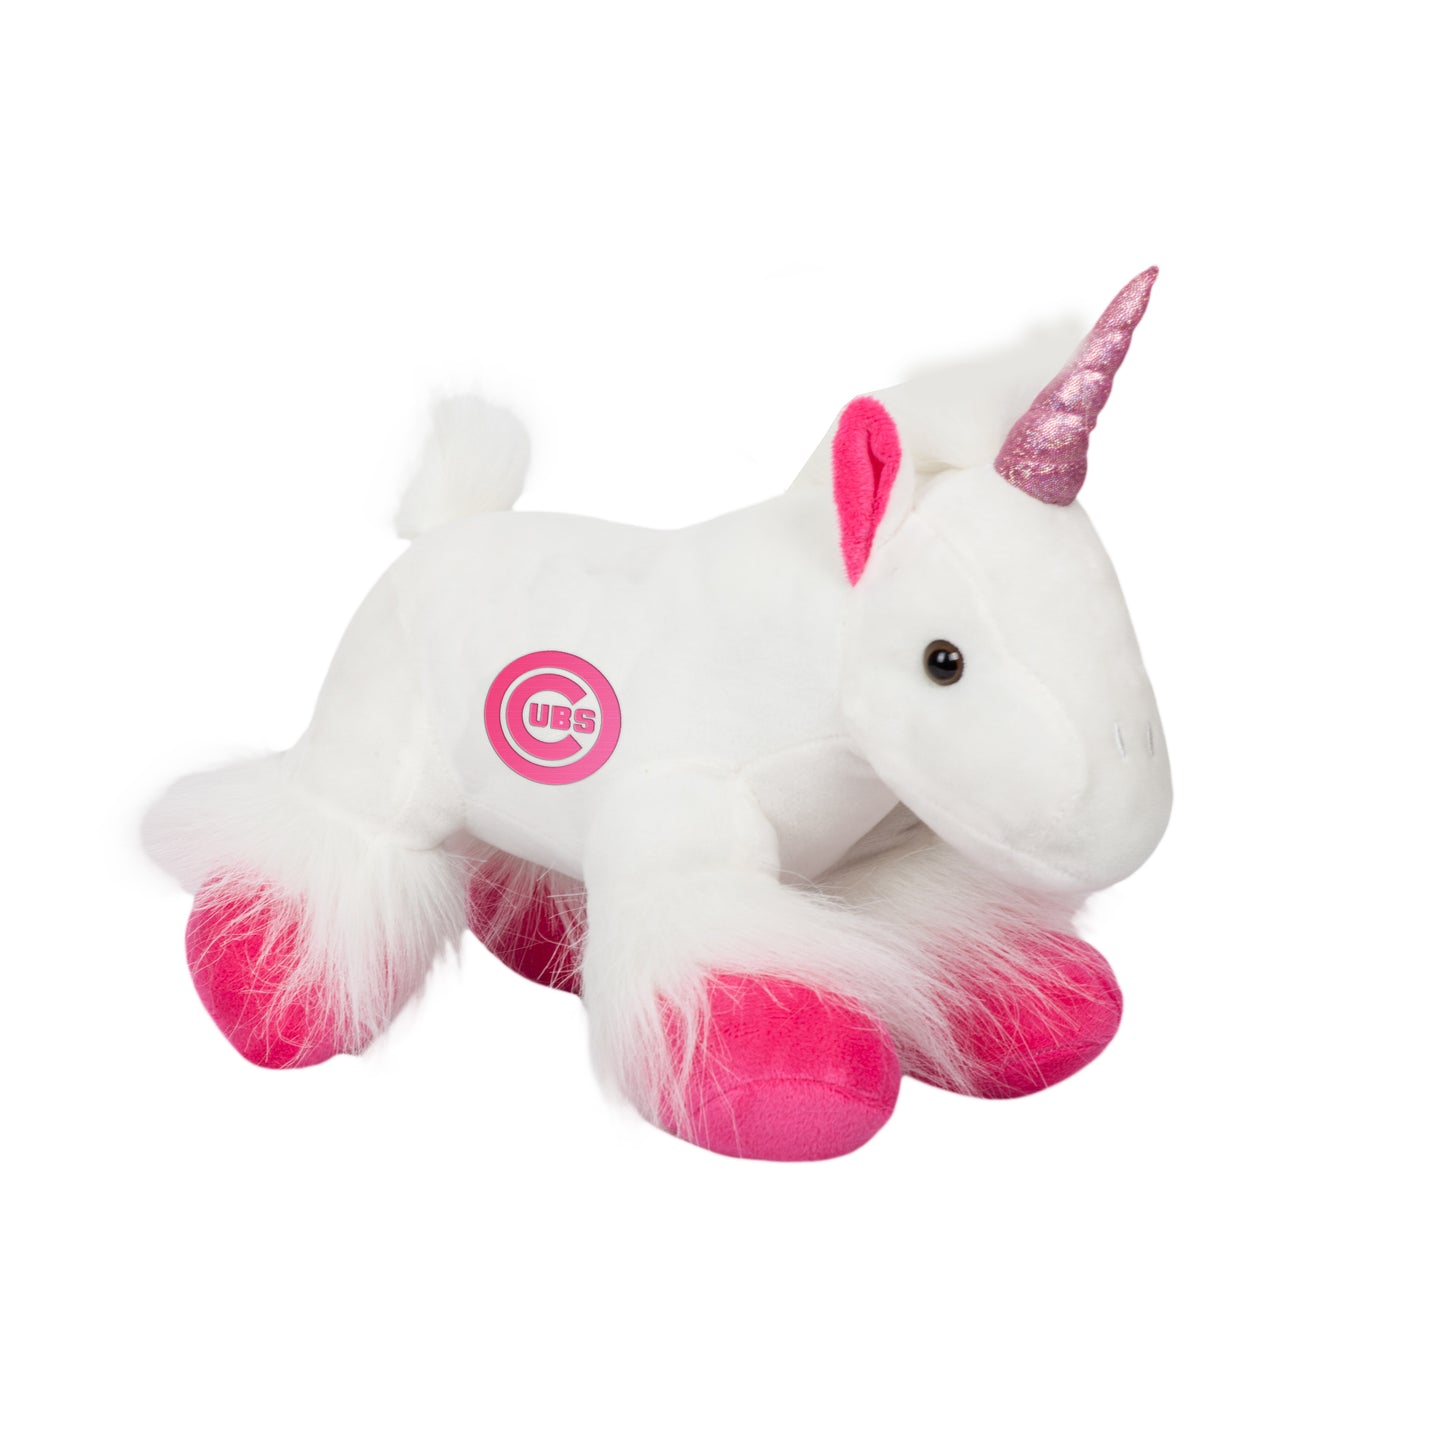 Chicago Cubs 9.5" White and Pink Plush Unicorn